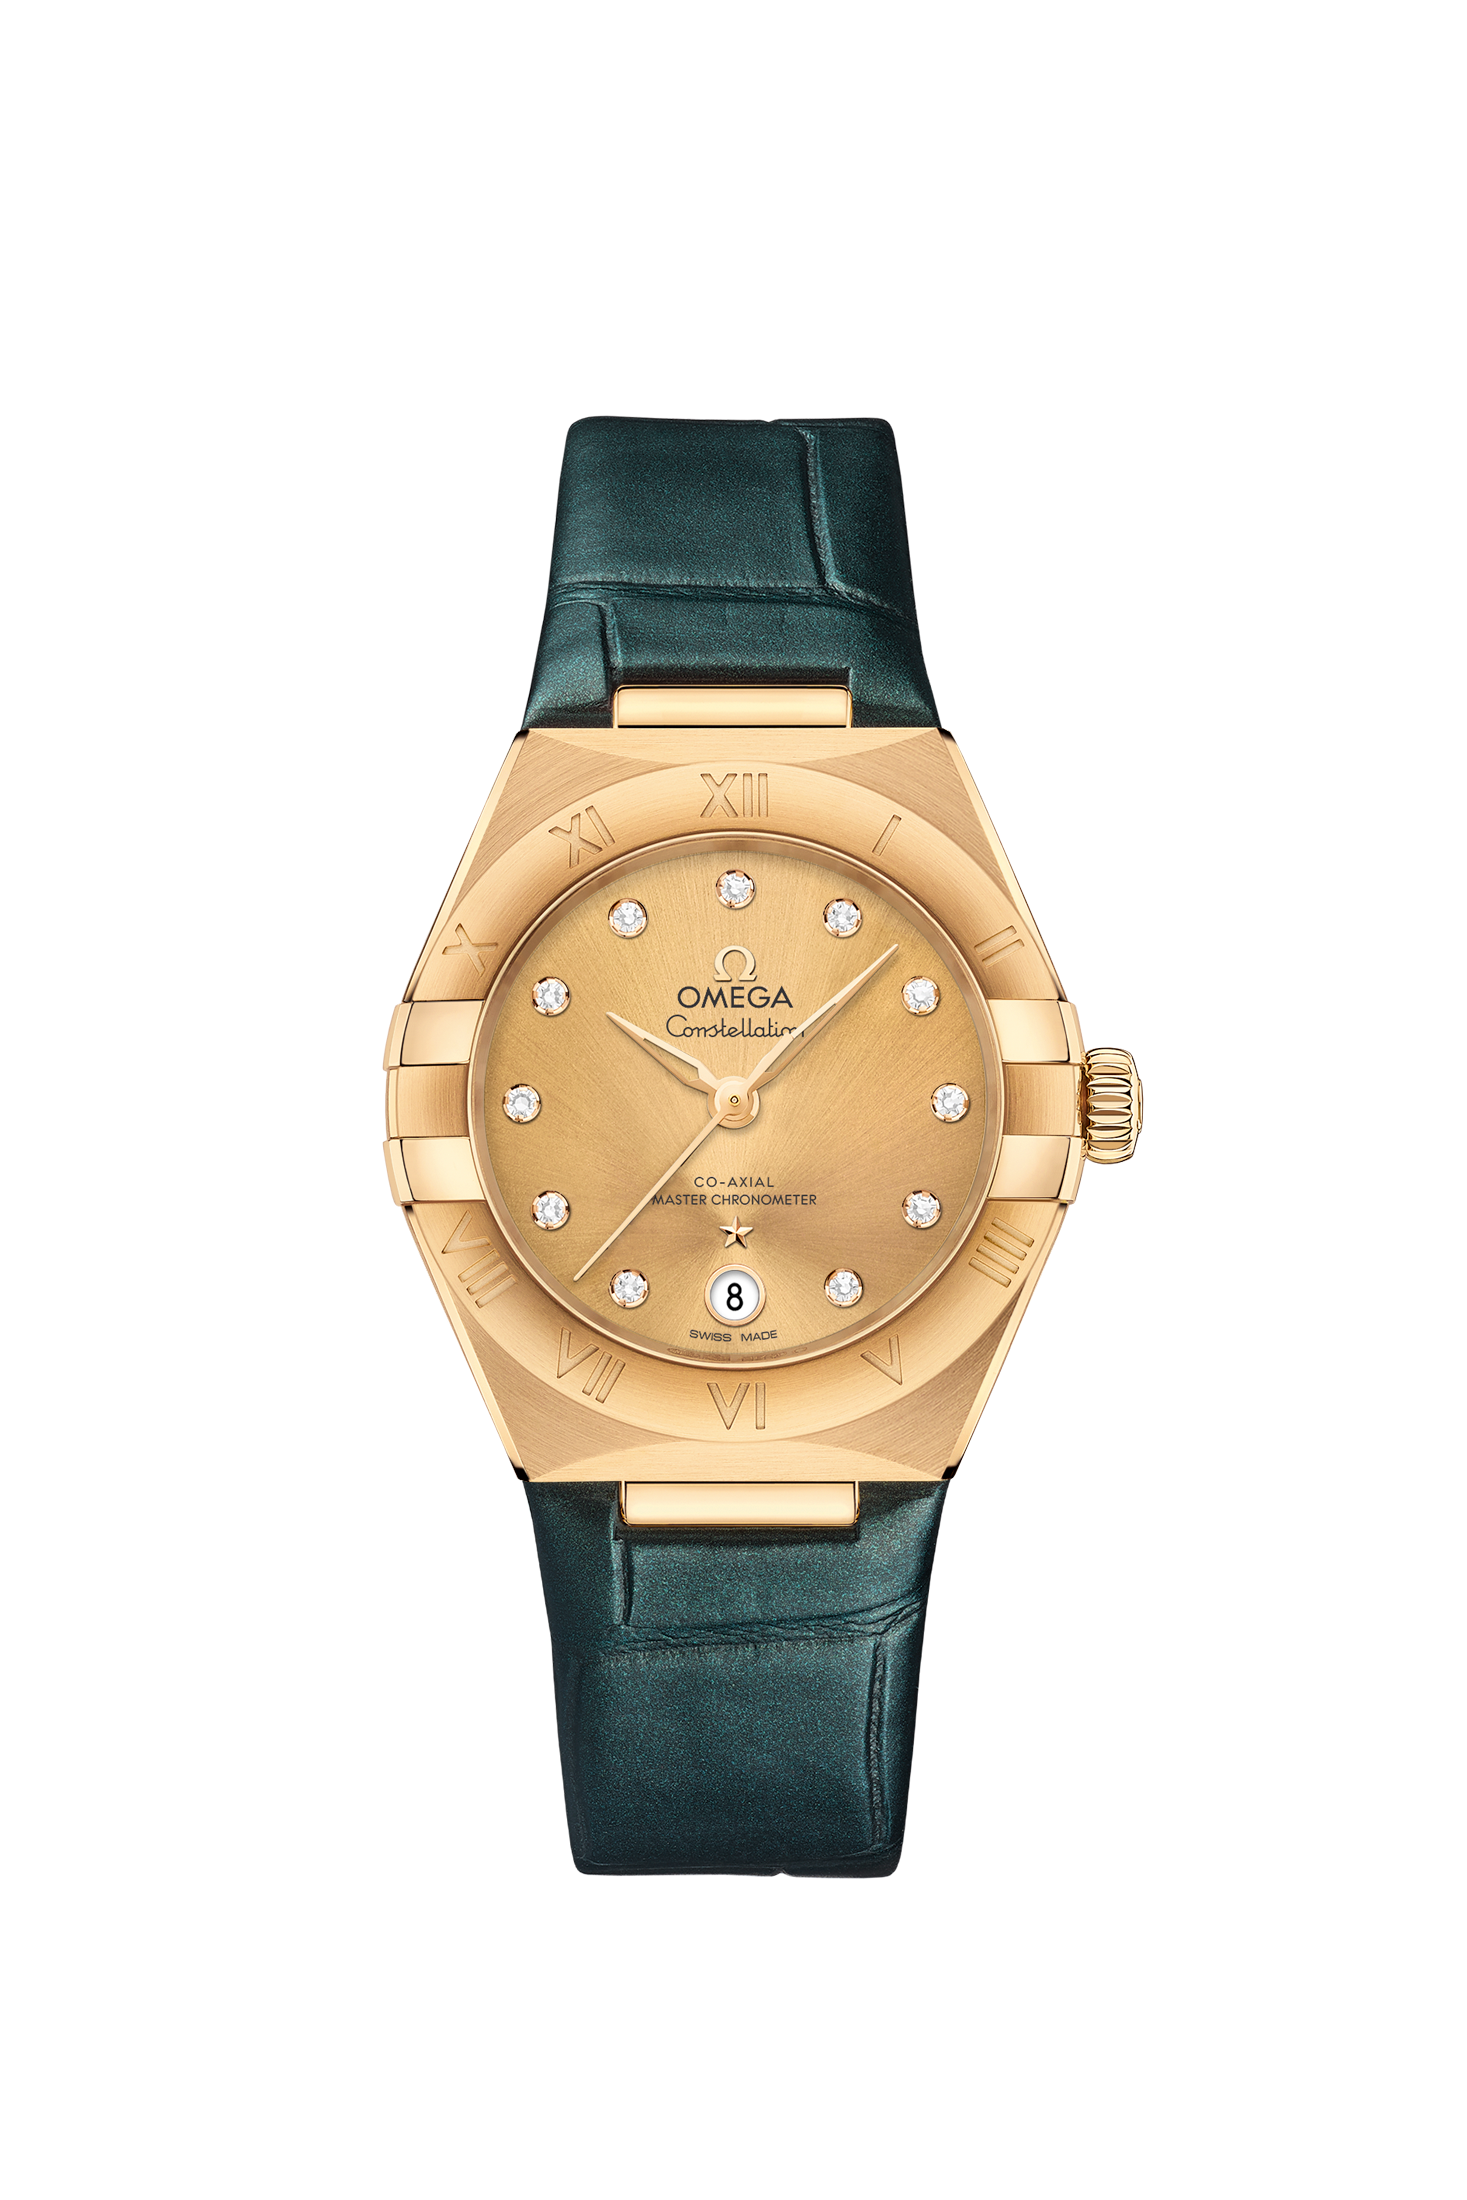 Ladies' watch  OMEGA, Constellation Co Axial Master Chronometer / 29mm, SKU: 131.53.29.20.58.001 | watchapproach.com